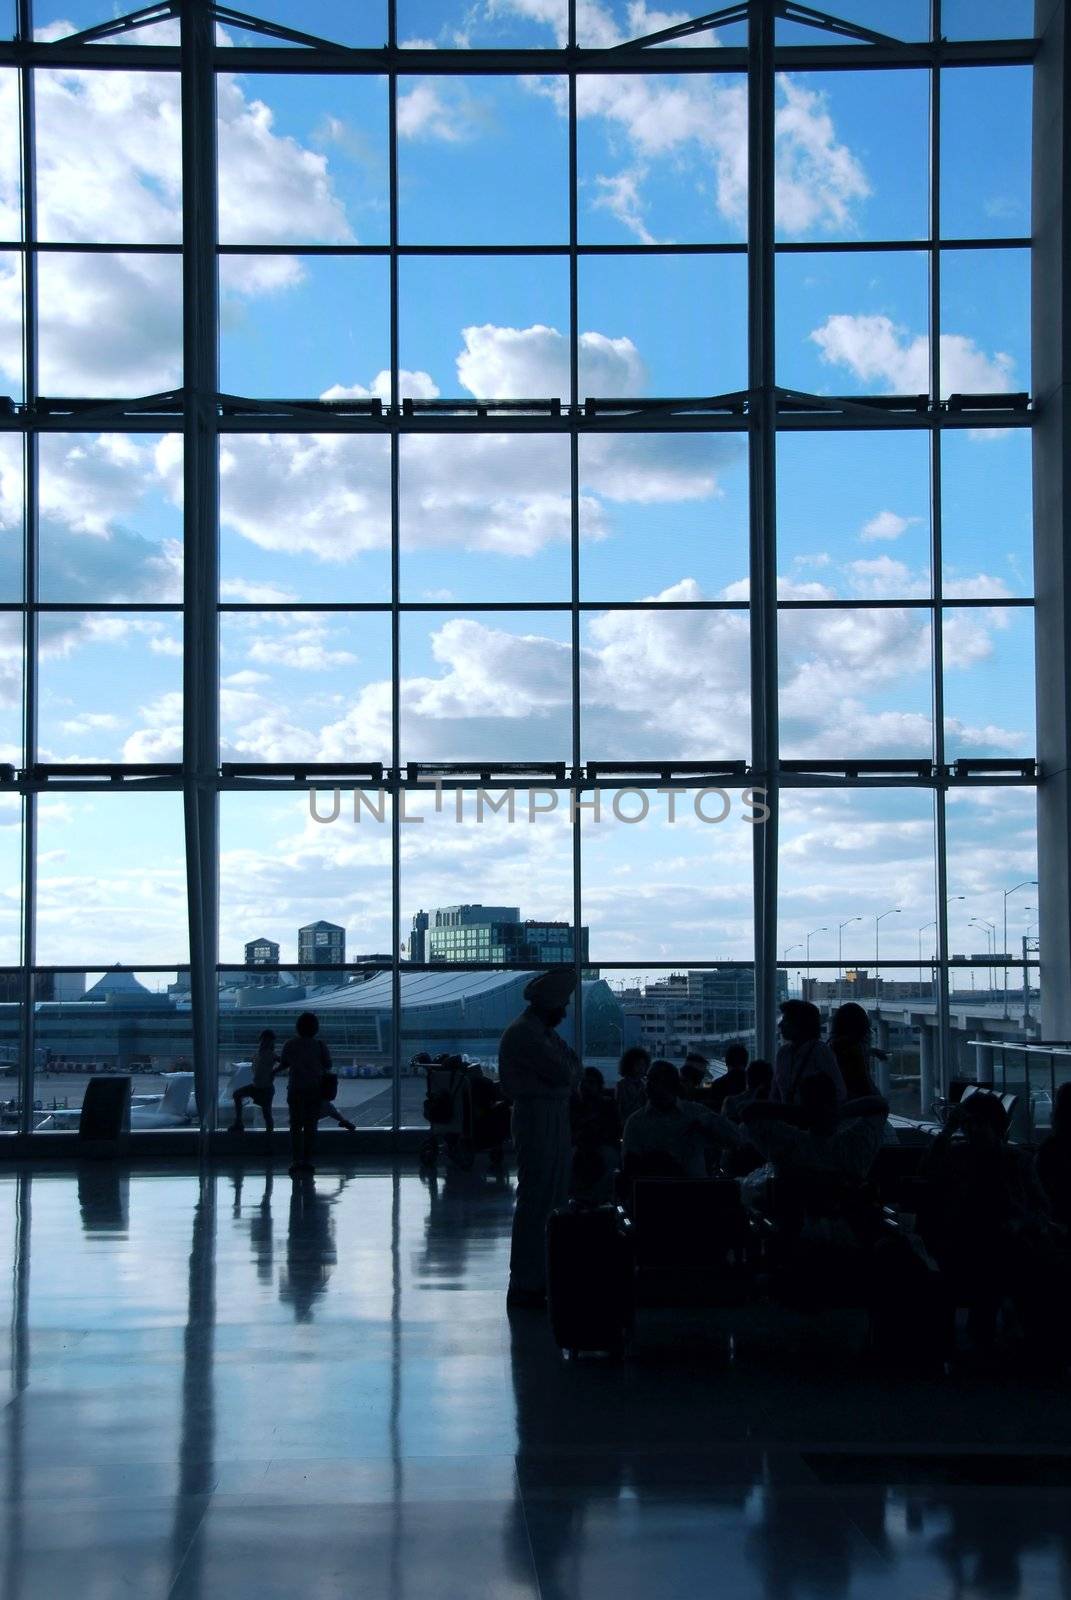 People waiting at the international airport terminal, bright blue sky outside